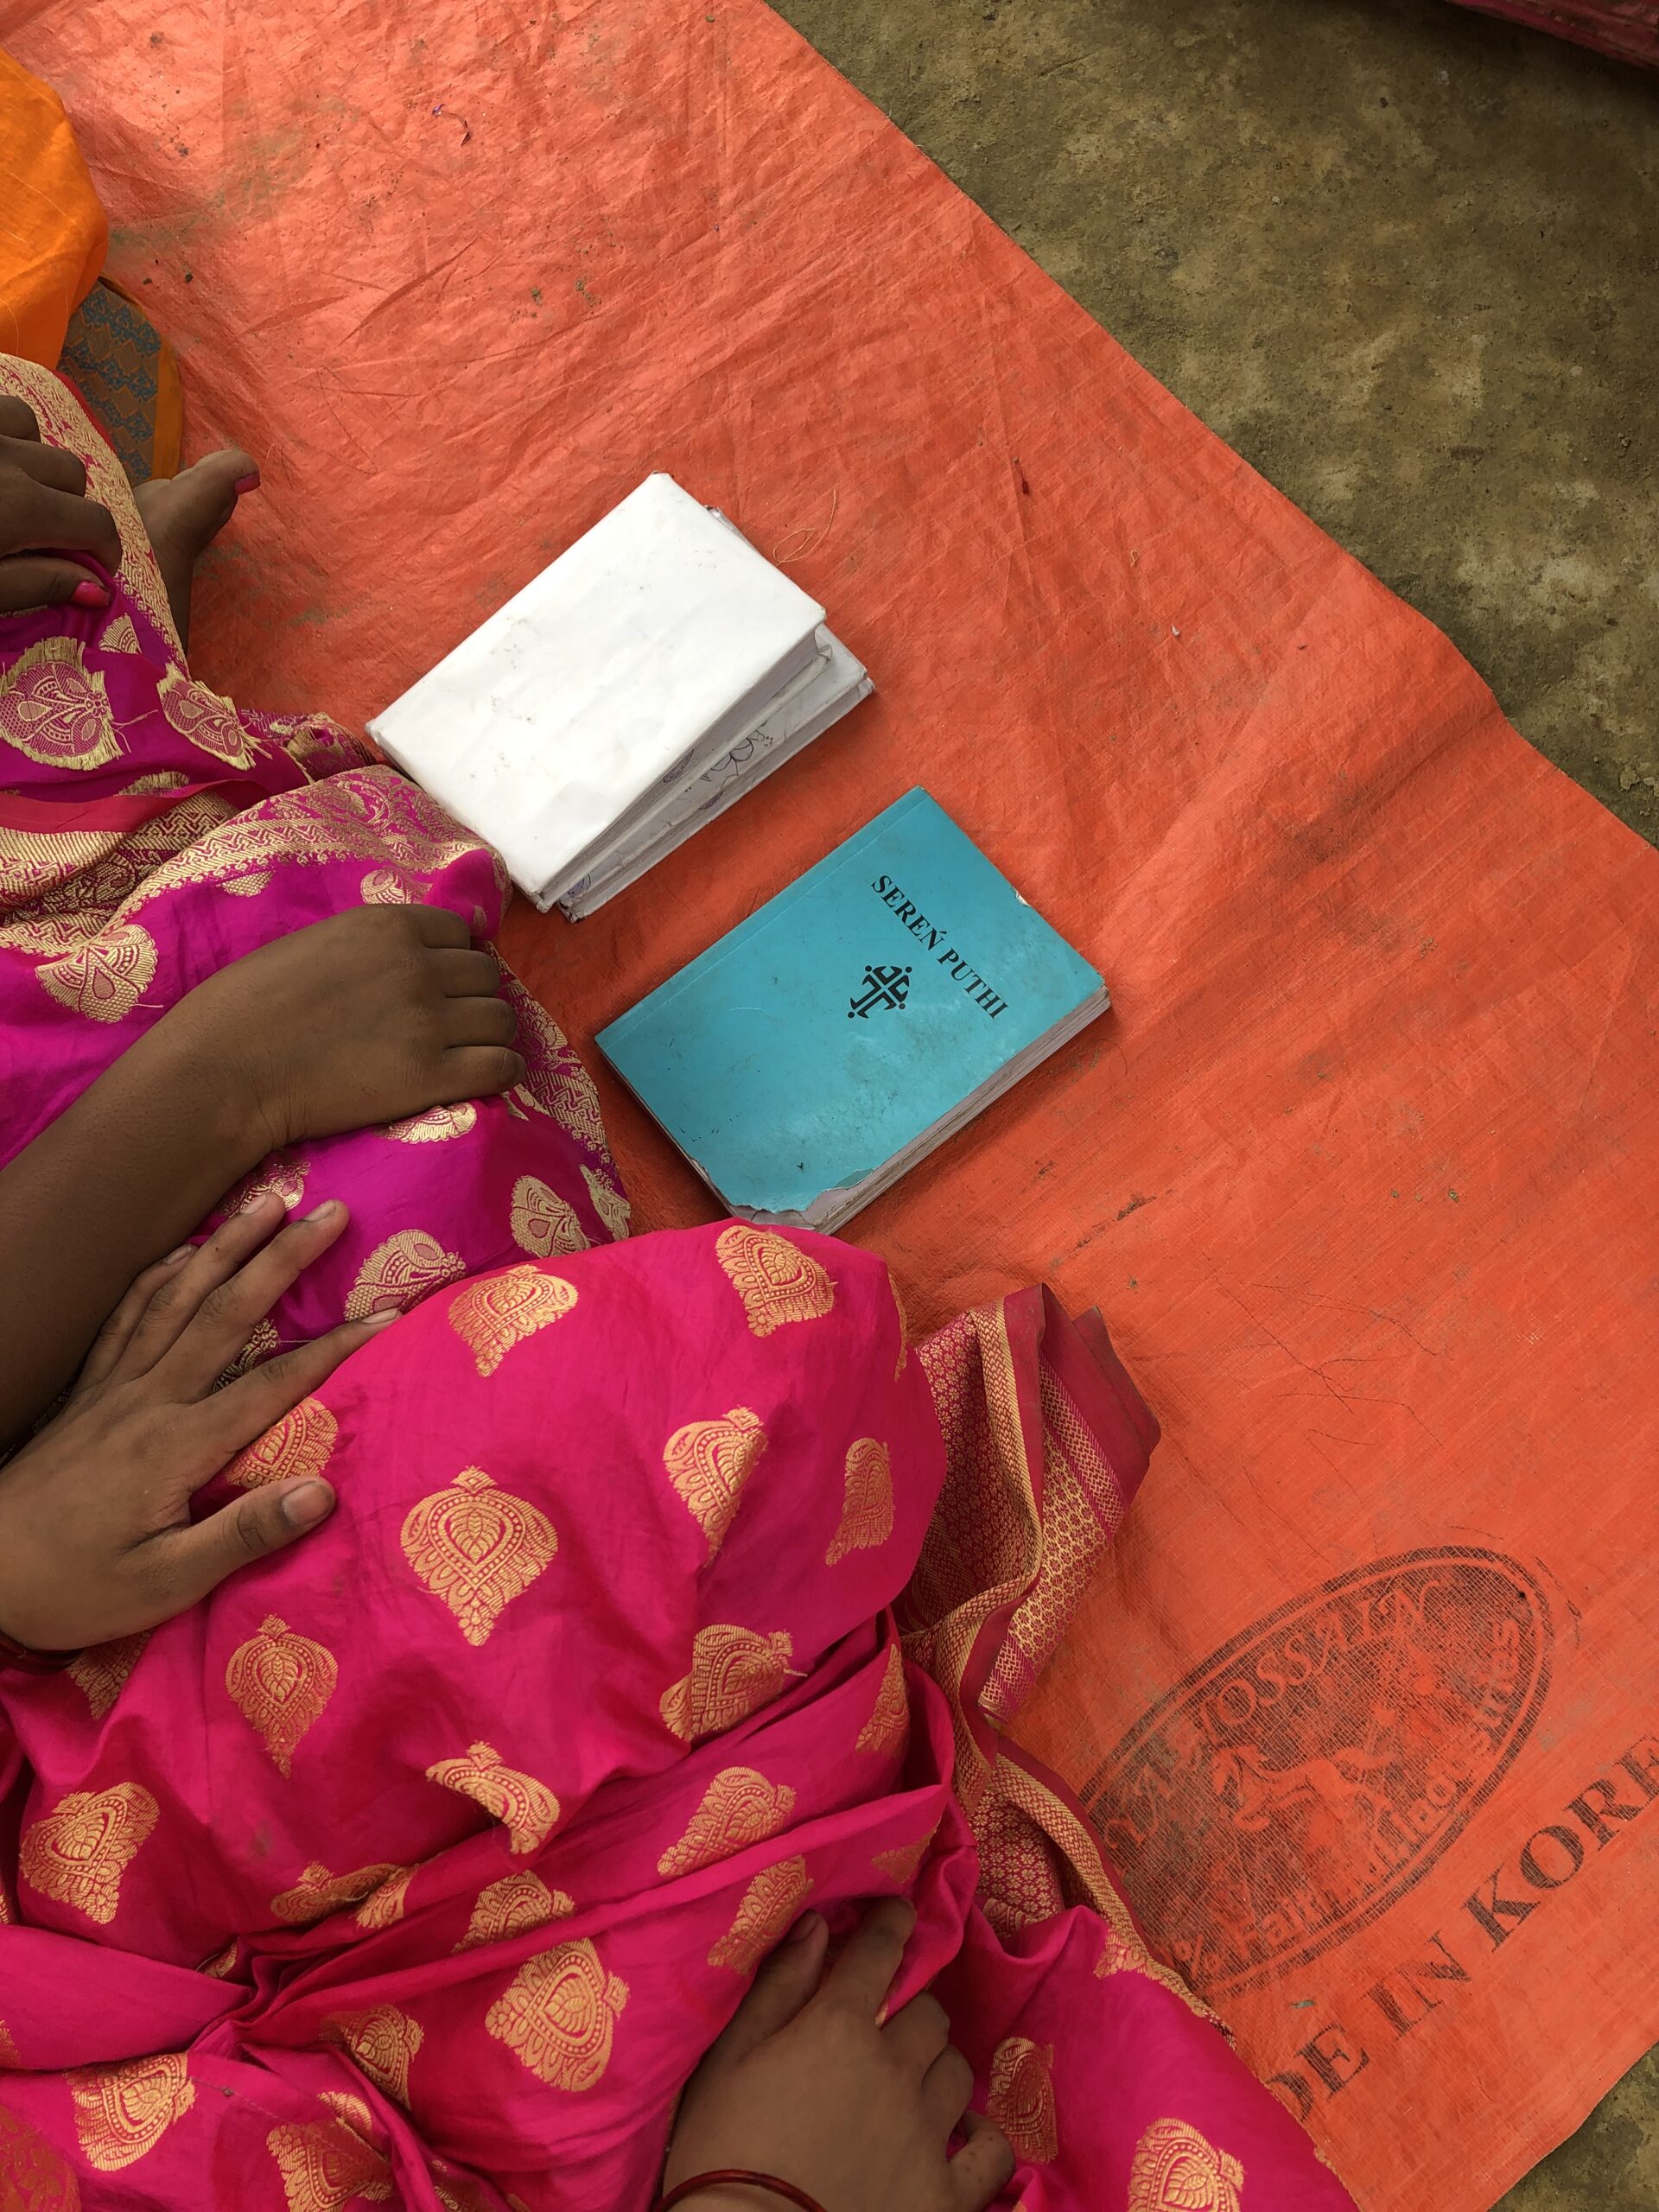 Two items newly baptized believers receive - a Bible and Hymn book in their own language